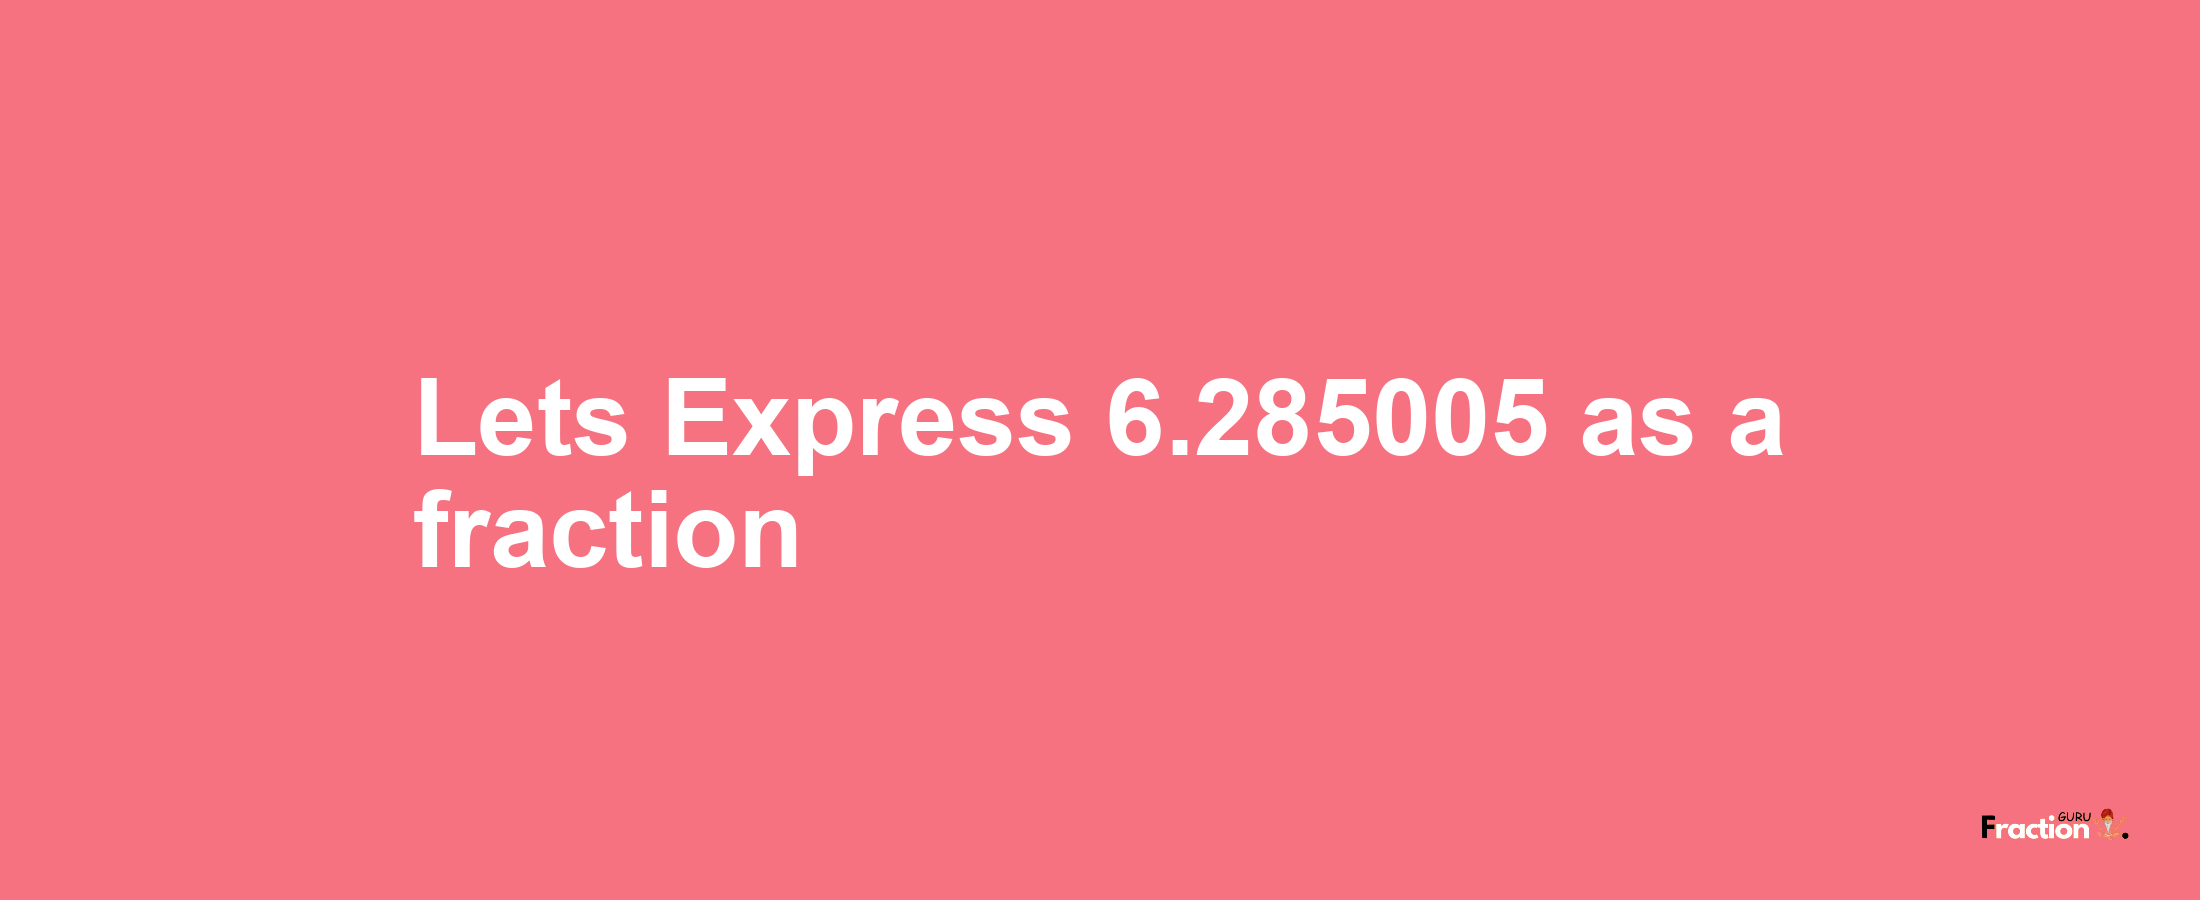 Lets Express 6.285005 as afraction